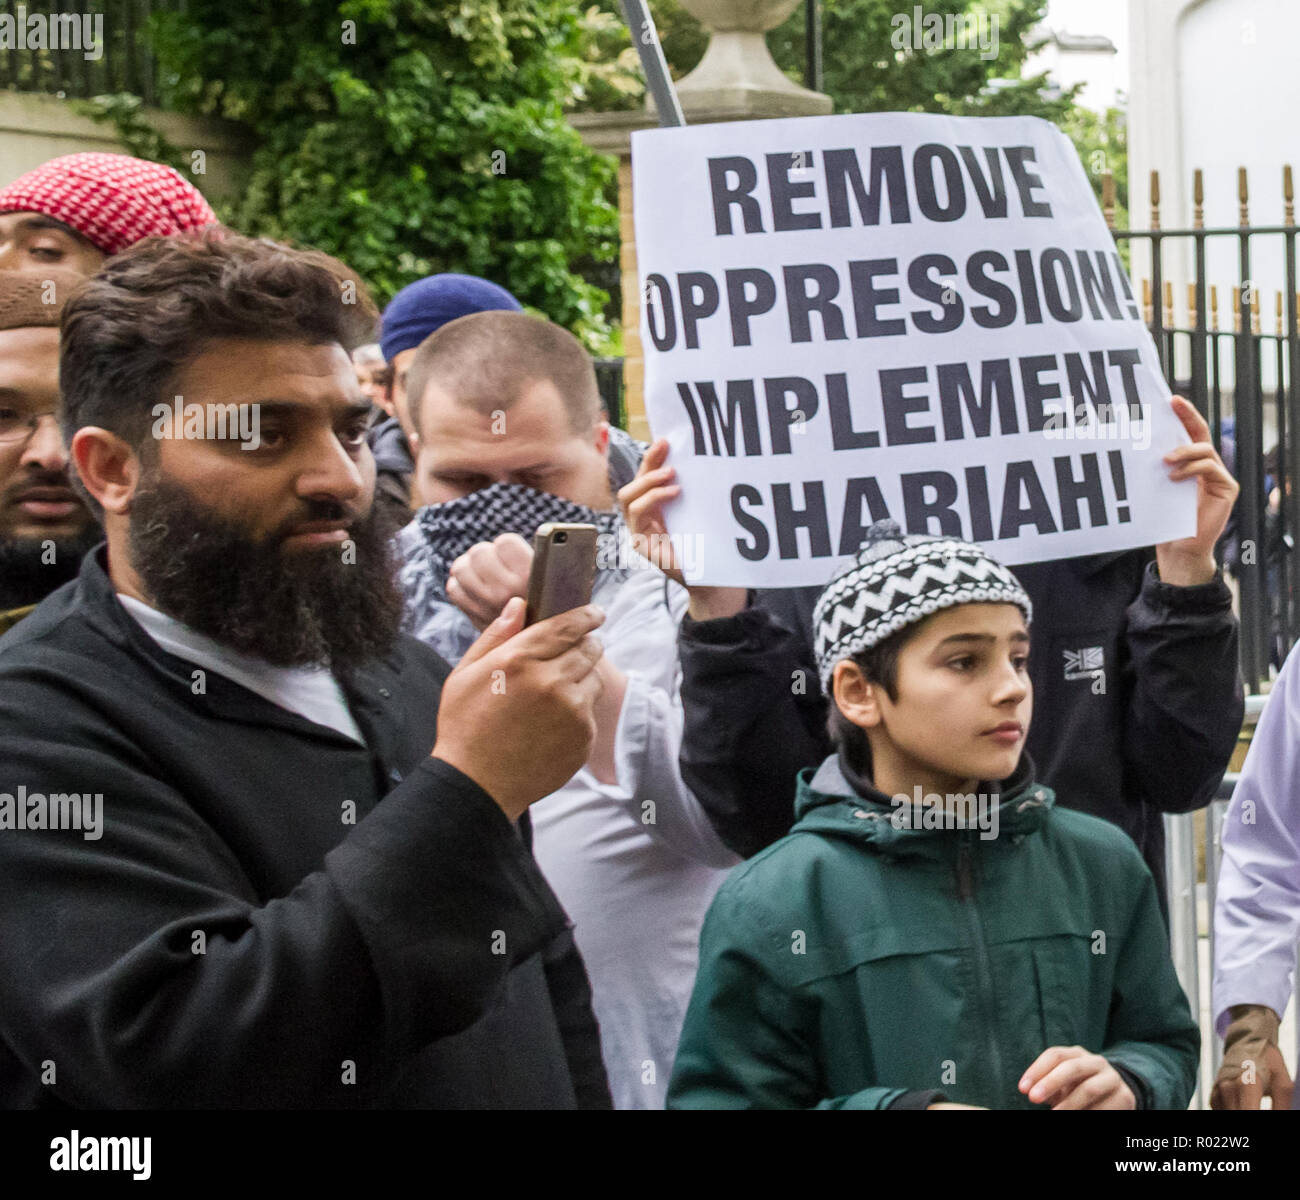 London, UK. 30th May, 2014. File Image from 30-05-2014: Lewis Ludlow, 26, from Rochester in Kent, a Muslim convert (pic centre, face covering) also used the name Ali Hussain, is due to be sentenced for plotting an Islamic State-inspired attack on Oxford Street in which he hoped to kill 100 people. Ludlow is seen here in 2014 outside the London Central Mosque during a protest organised by radical cleric Anjem Choudary and his banned Al-Muhajiroun (ALM) group. Credit: Guy Corbishley/Alamy Live News Stock Photo